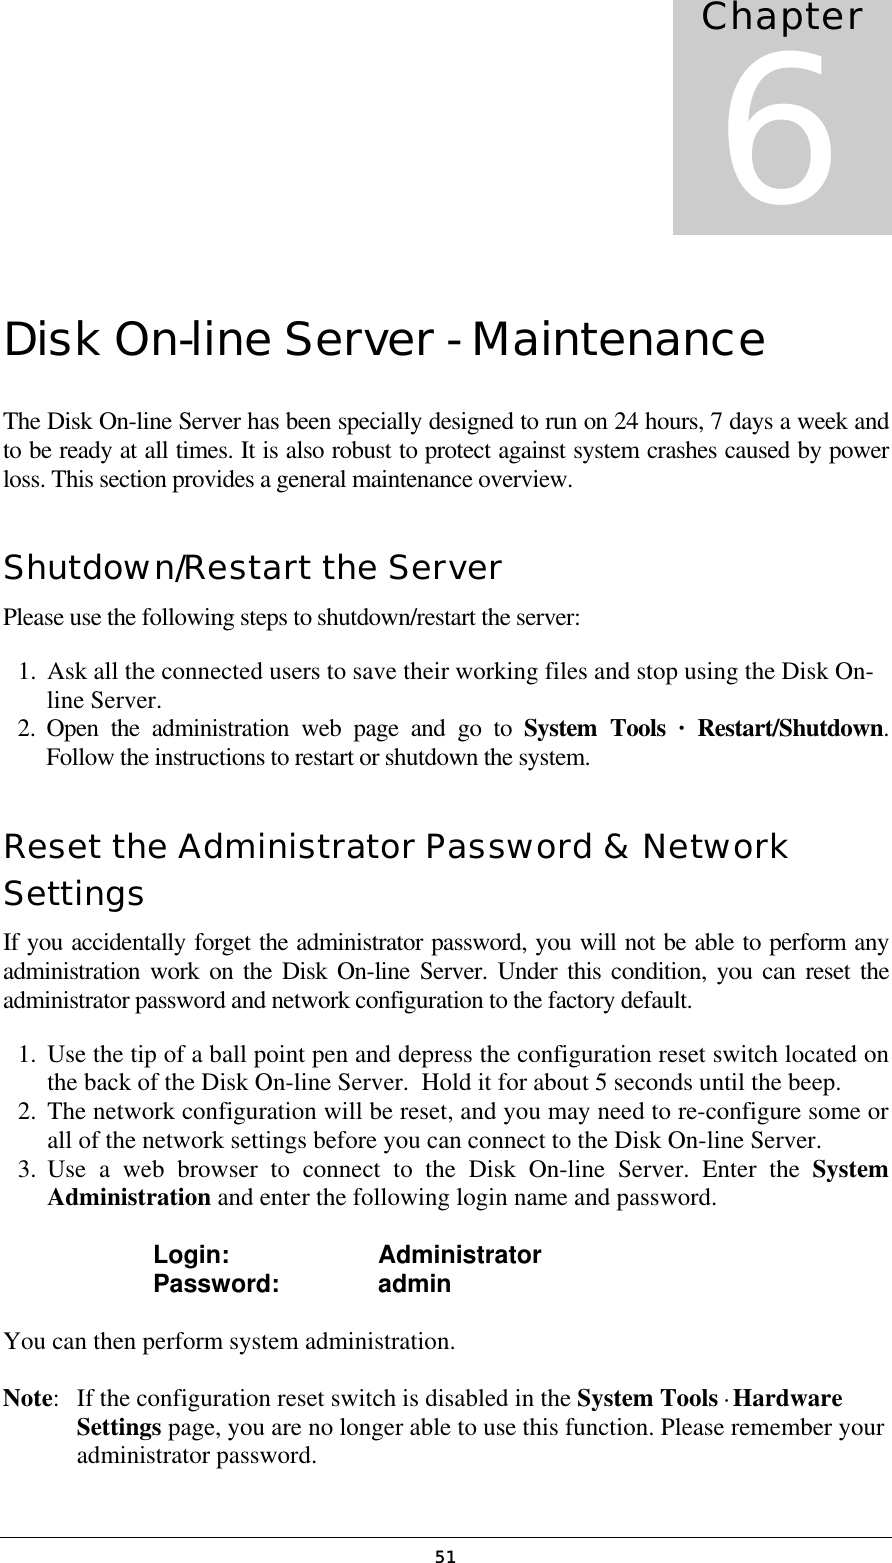   51Disk On-line Server - Maintenance The Disk On-line Server has been specially designed to run on 24 hours, 7 days a week and to be ready at all times. It is also robust to protect against system crashes caused by power loss. This section provides a general maintenance overview. Shutdown/Restart the Server Please use the following steps to shutdown/restart the server: 1.  Ask all the connected users to save their working files and stop using the Disk On-line Server.  2. Open the administration web page and go to System Tools · Restart/Shutdown. Follow the instructions to restart or shutdown the system. Reset the Administrator Password &amp; Network Settings If you accidentally forget the administrator password, you will not be able to perform any administration work on the Disk On-line Server. Under this condition, you can reset the administrator password and network configuration to the factory default. 1.  Use the tip of a ball point pen and depress the configuration reset switch located on the back of the Disk On-line Server.  Hold it for about 5 seconds until the beep. 2.  The network configuration will be reset, and you may need to re-configure some or all of the network settings before you can connect to the Disk On-line Server. 3. Use a web browser to connect to the Disk On-line Server. Enter the System Administration and enter the following login name and password.     Login:      Administrator   Password:    admin  You can then perform system administration.  Note:  If the configuration reset switch is disabled in the System Tools · Hardware Settings page, you are no longer able to use this function. Please remember your administrator password. Chapter 6